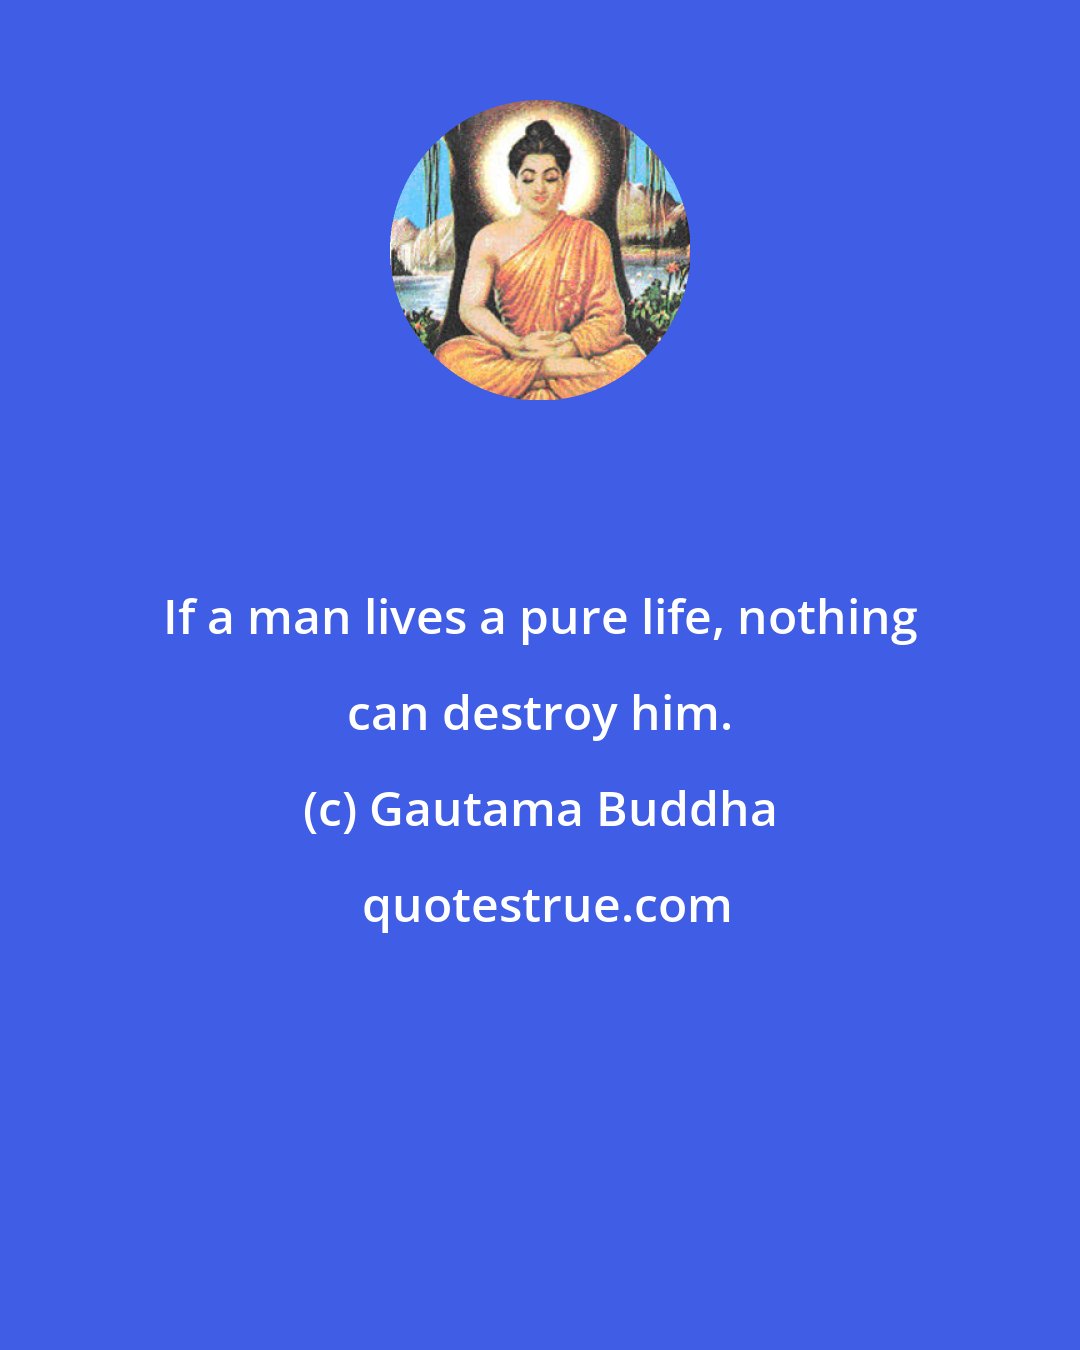 Gautama Buddha: If a man lives a pure life, nothing can destroy him.